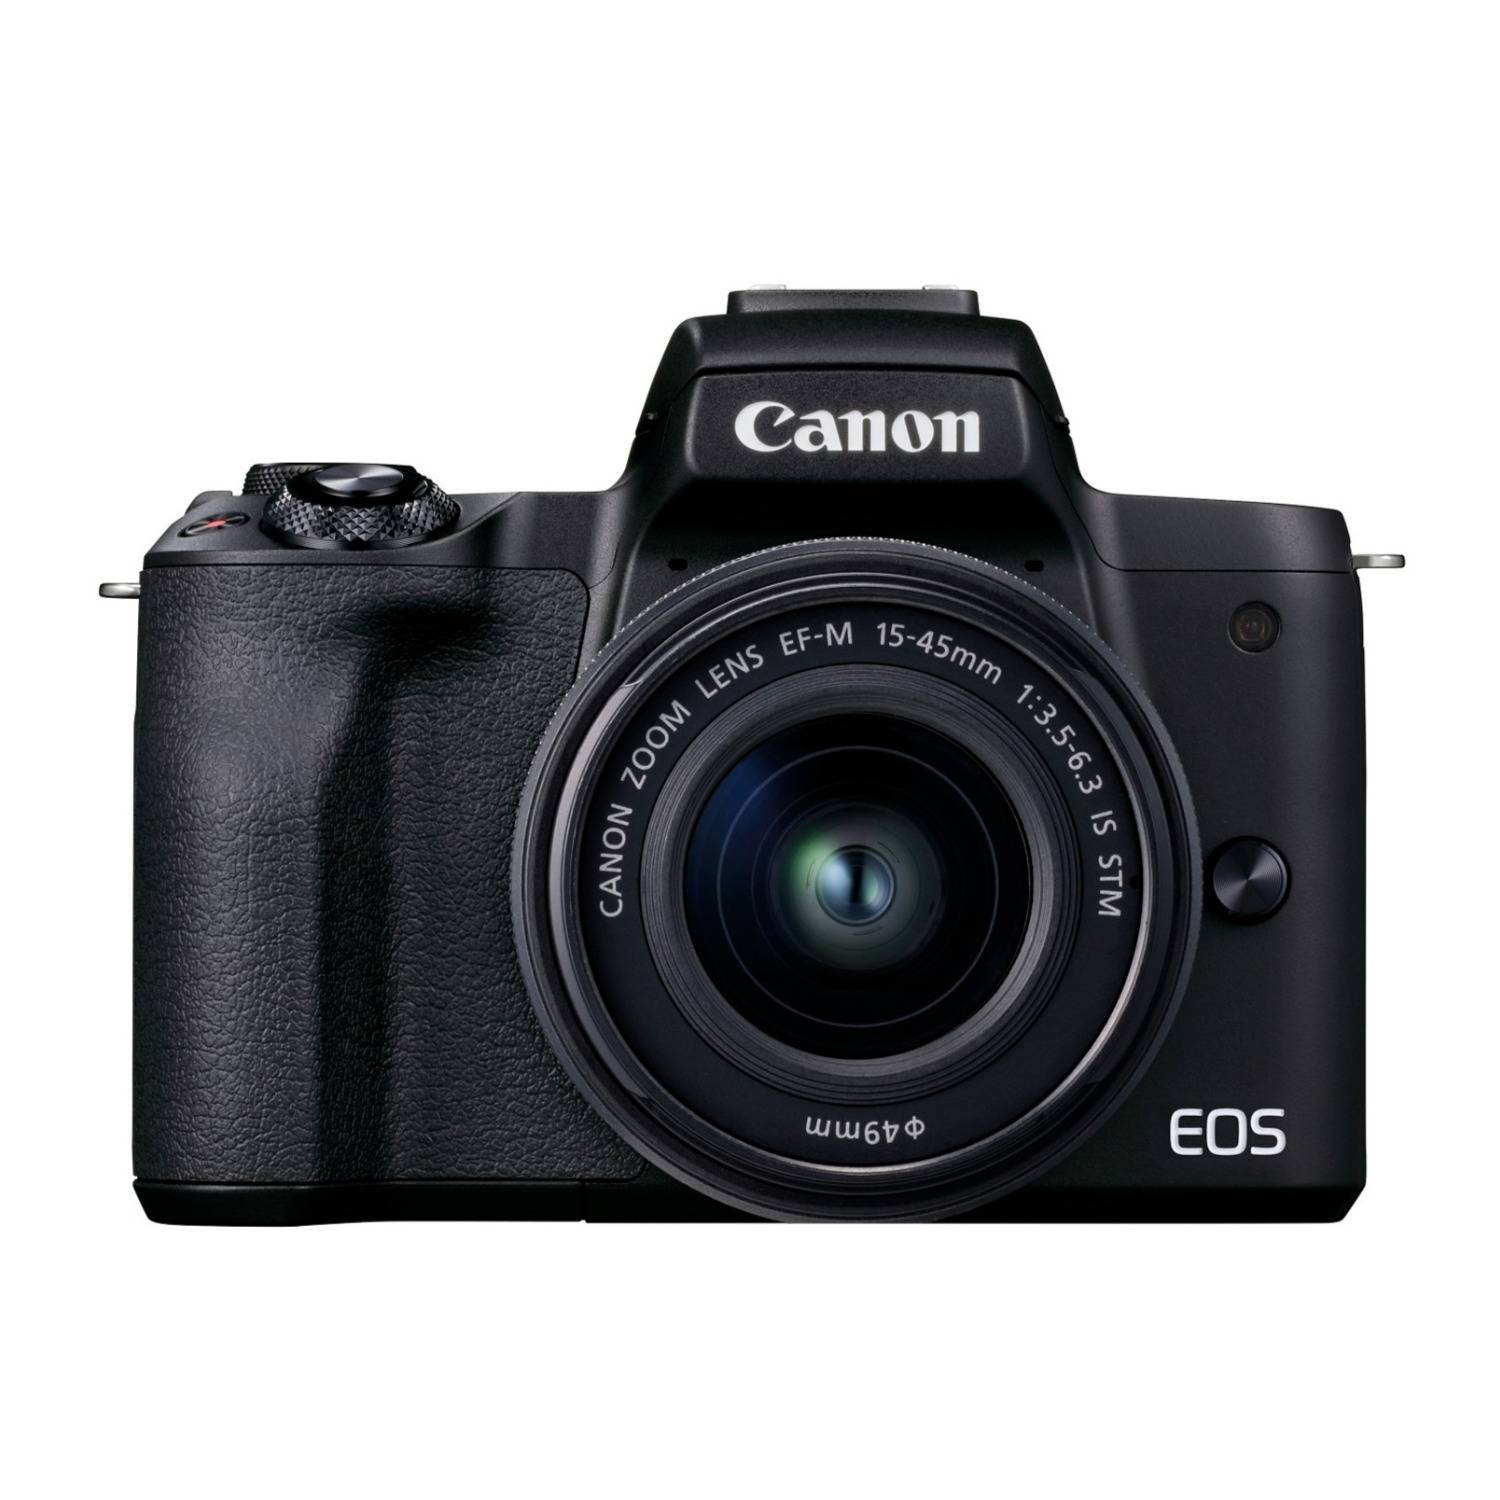 Canon EOS M50 Mark II Mirrorless Digital Camera and EF-M 15-45mm IS STM Lens Kit (Black)